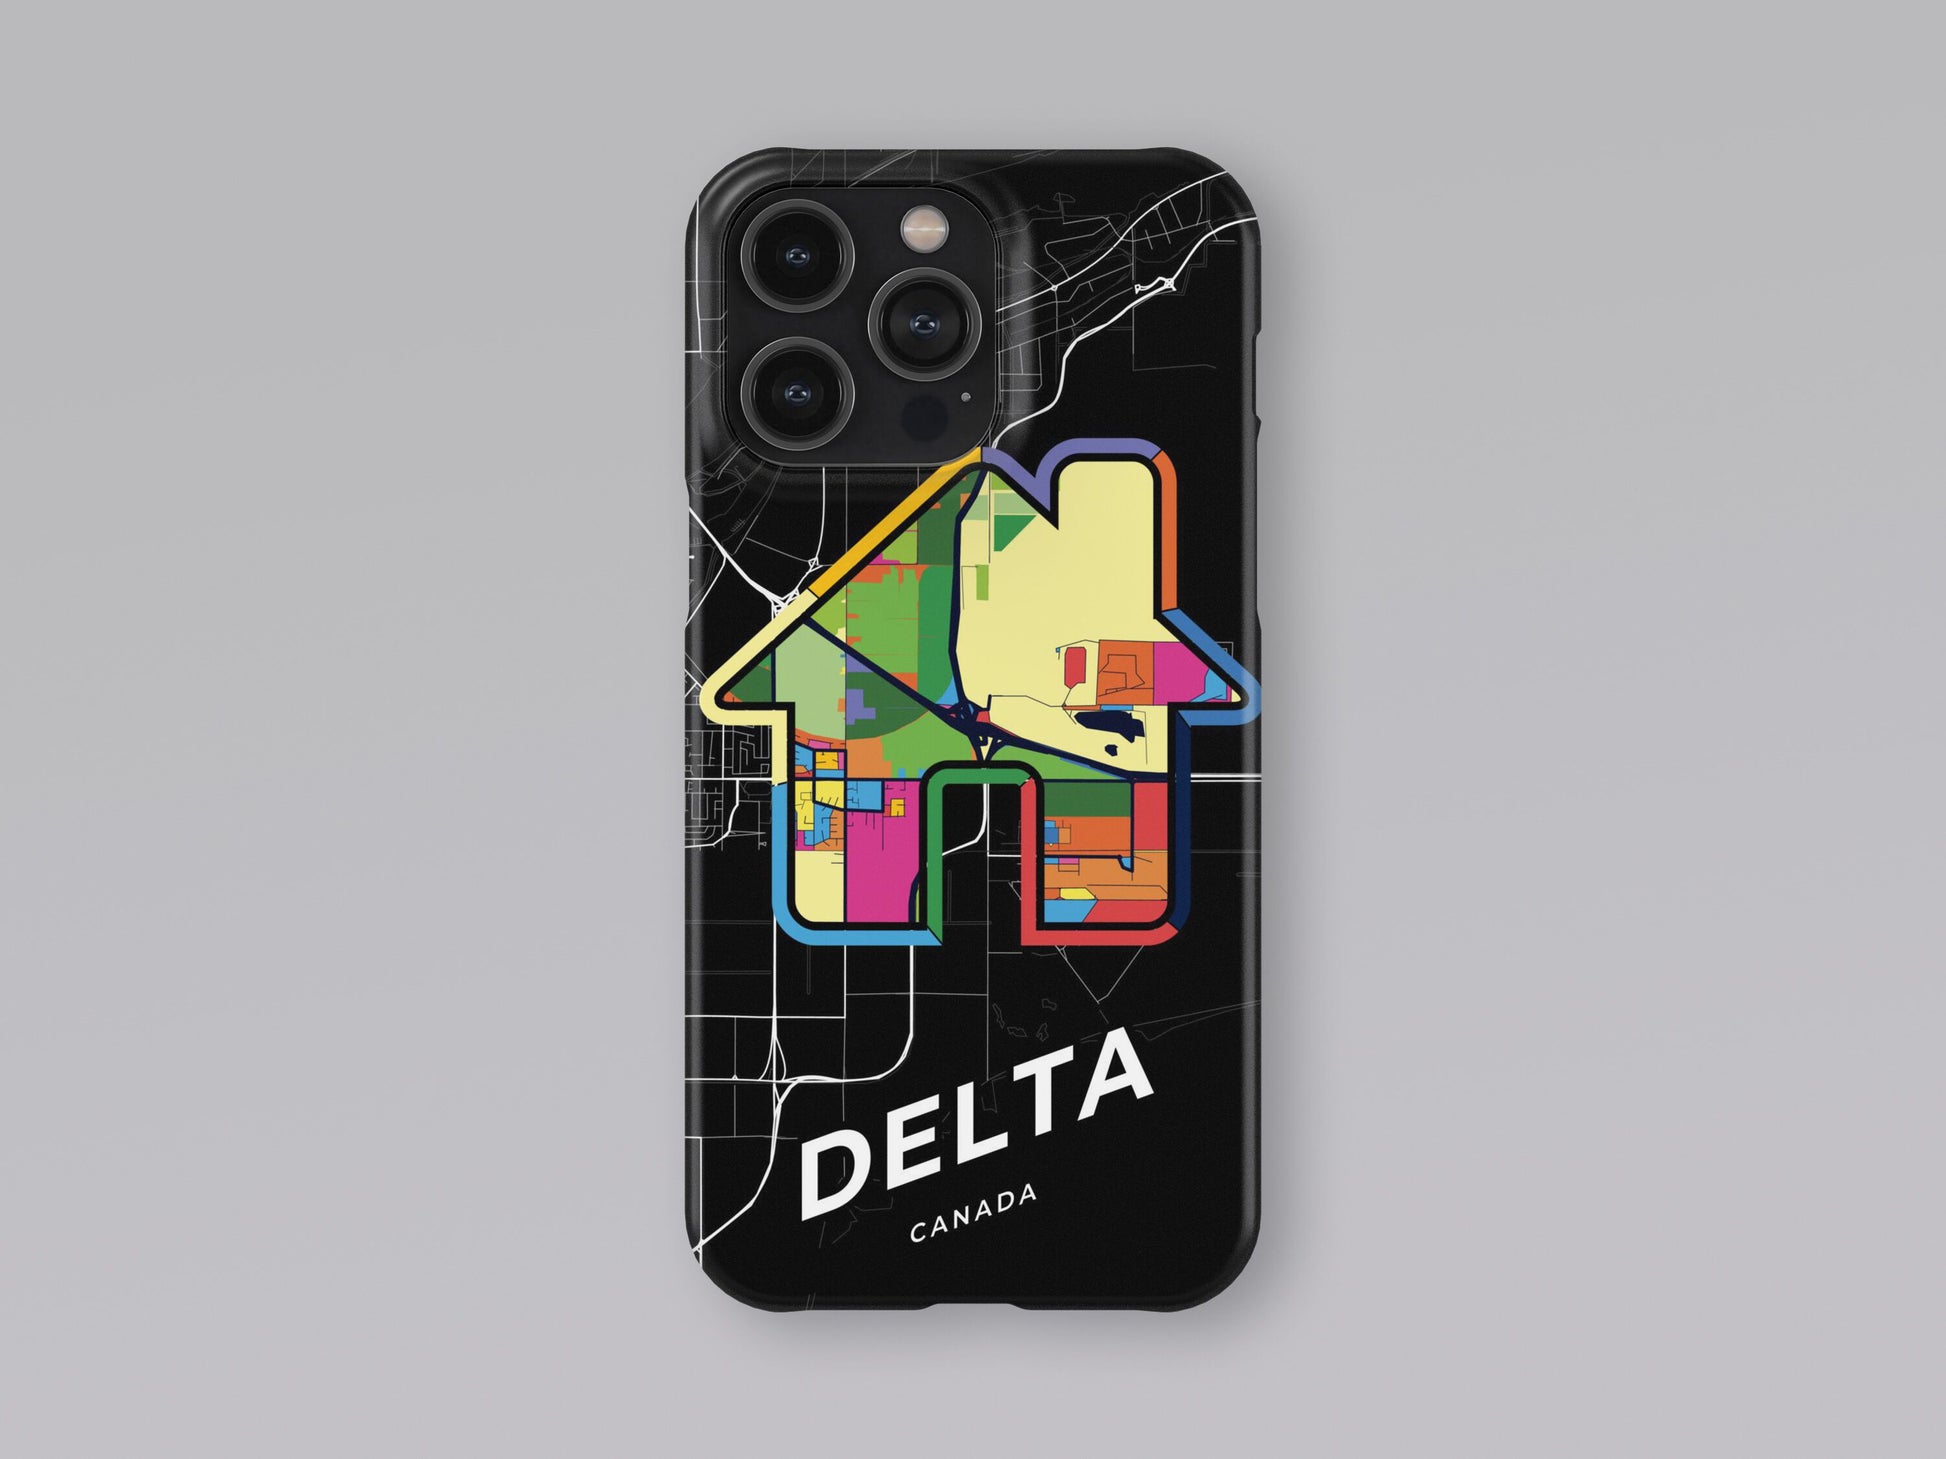 Delta Canada slim phone case with colorful icon. Birthday, wedding or housewarming gift. Couple match cases. 3